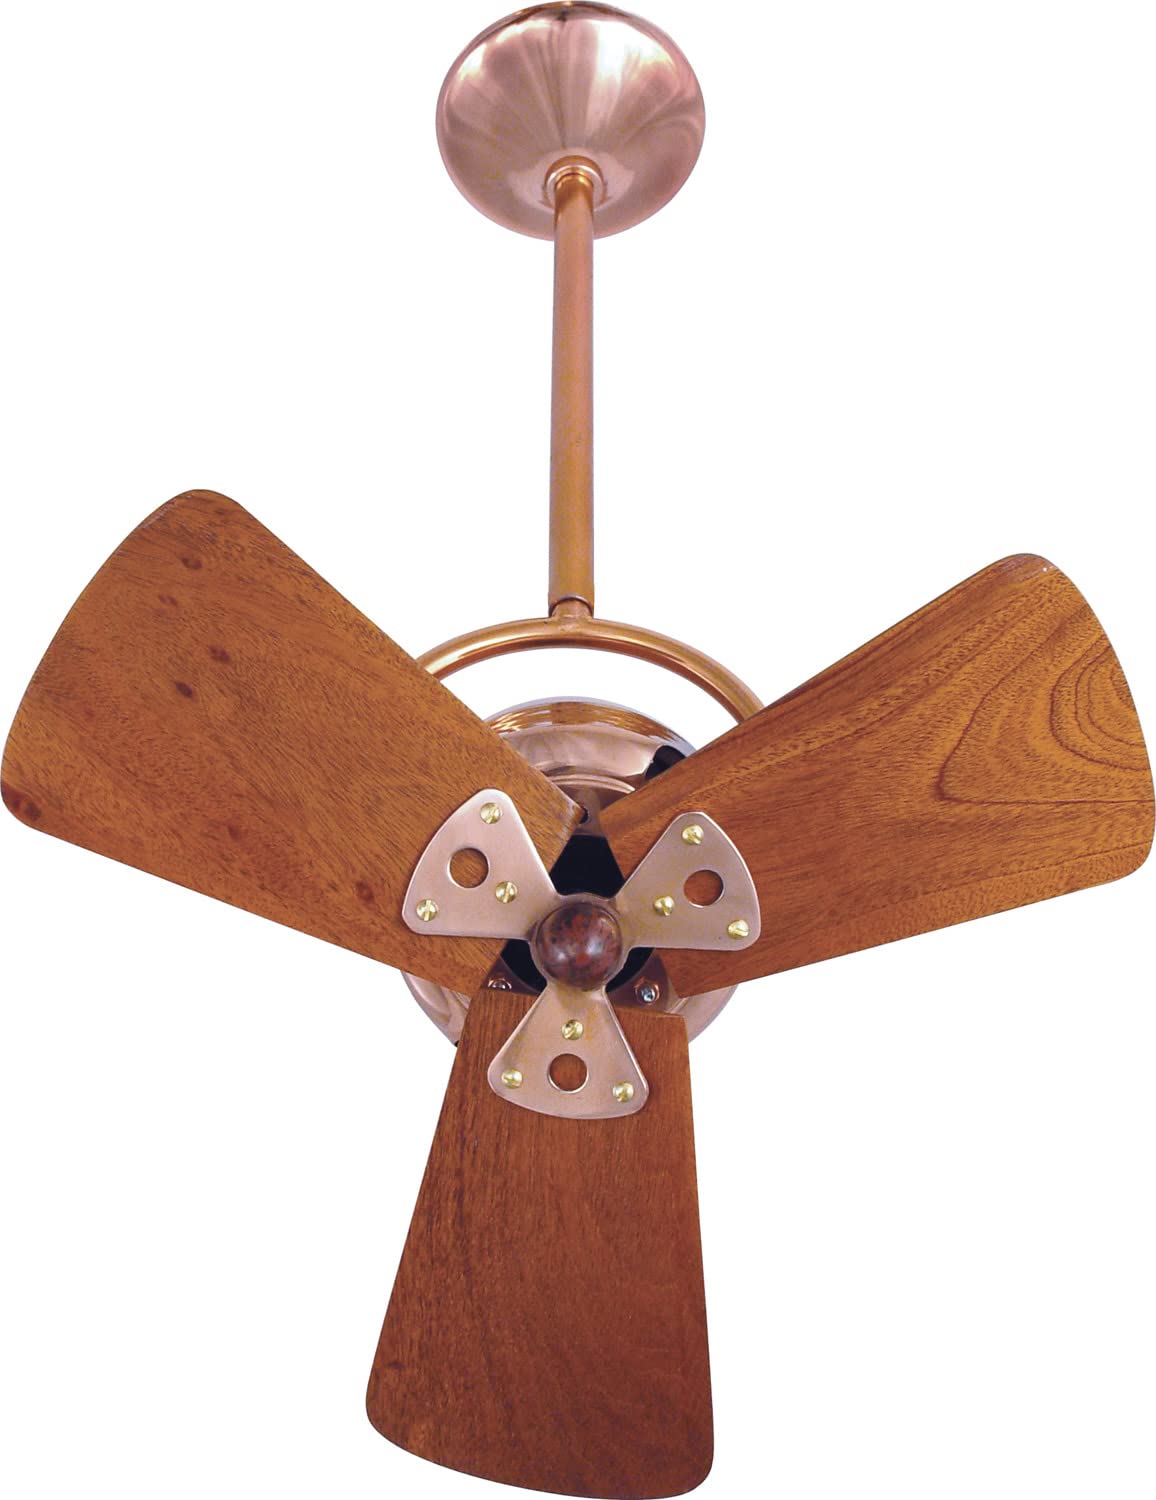 Matthews Fan BD-BLUE-WD Bianca Direcional ceiling fan in Safira (Blue) finish with solid sustainable mahogany wood blades.